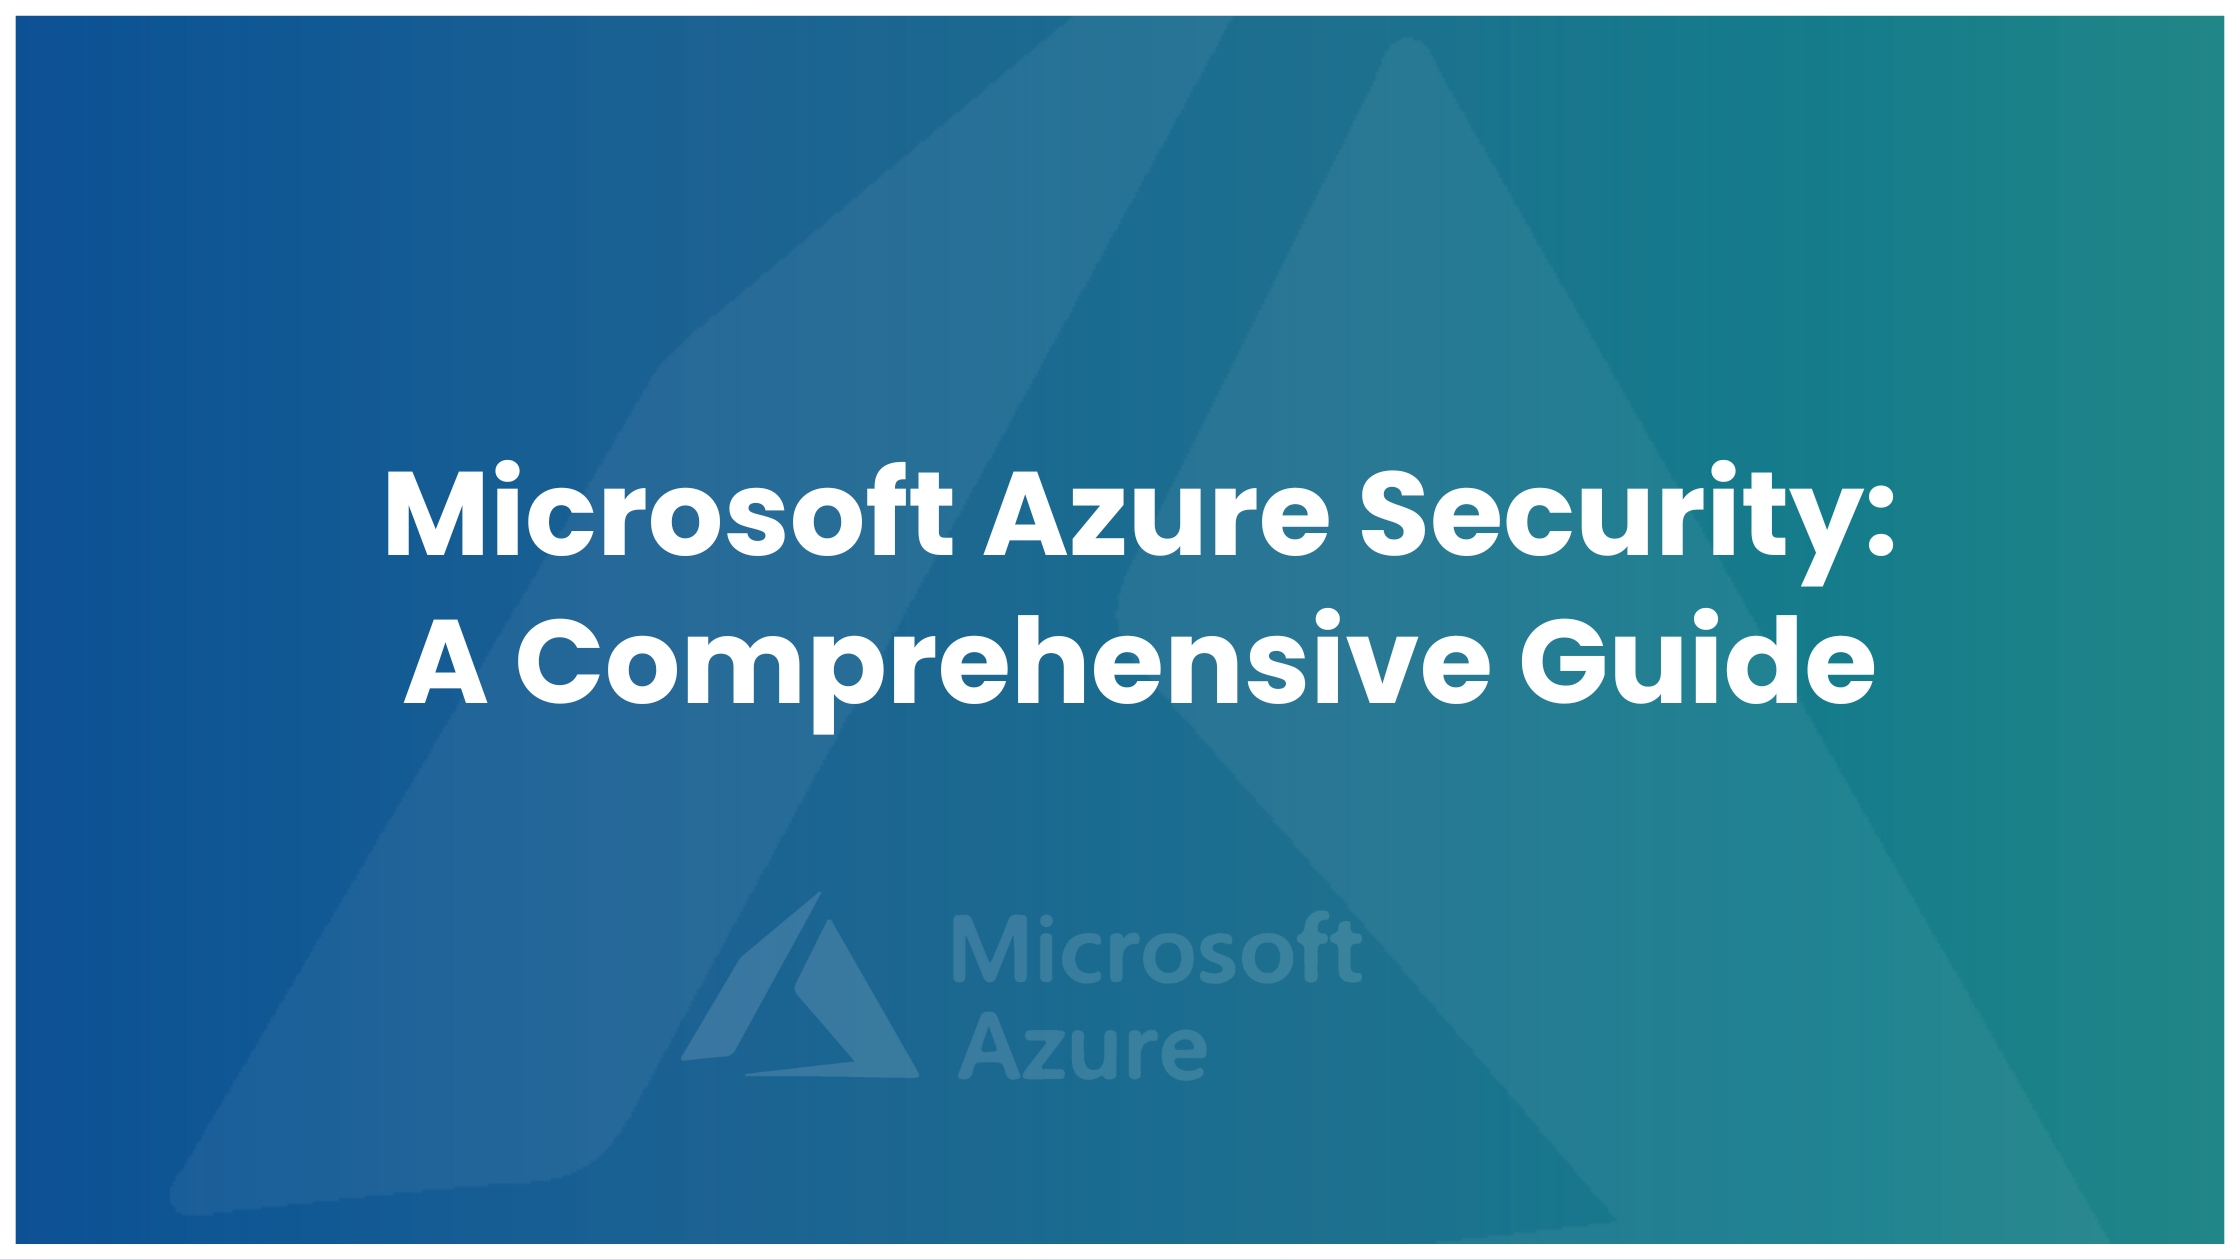 Banner promoting the comprehensive Microsoft Azure Security Guide. The image features a blue background with a Microsoft Azure logo at the center, surrounded by security icons representing data protection, encryption, access control, and threat detection. Text overlays read 'Microsoft Azure Security Guide: Comprehensive Tips and Best Practices.' The banner is designed to convey trust, expertise, and the importance of securing Azure cloud environments.